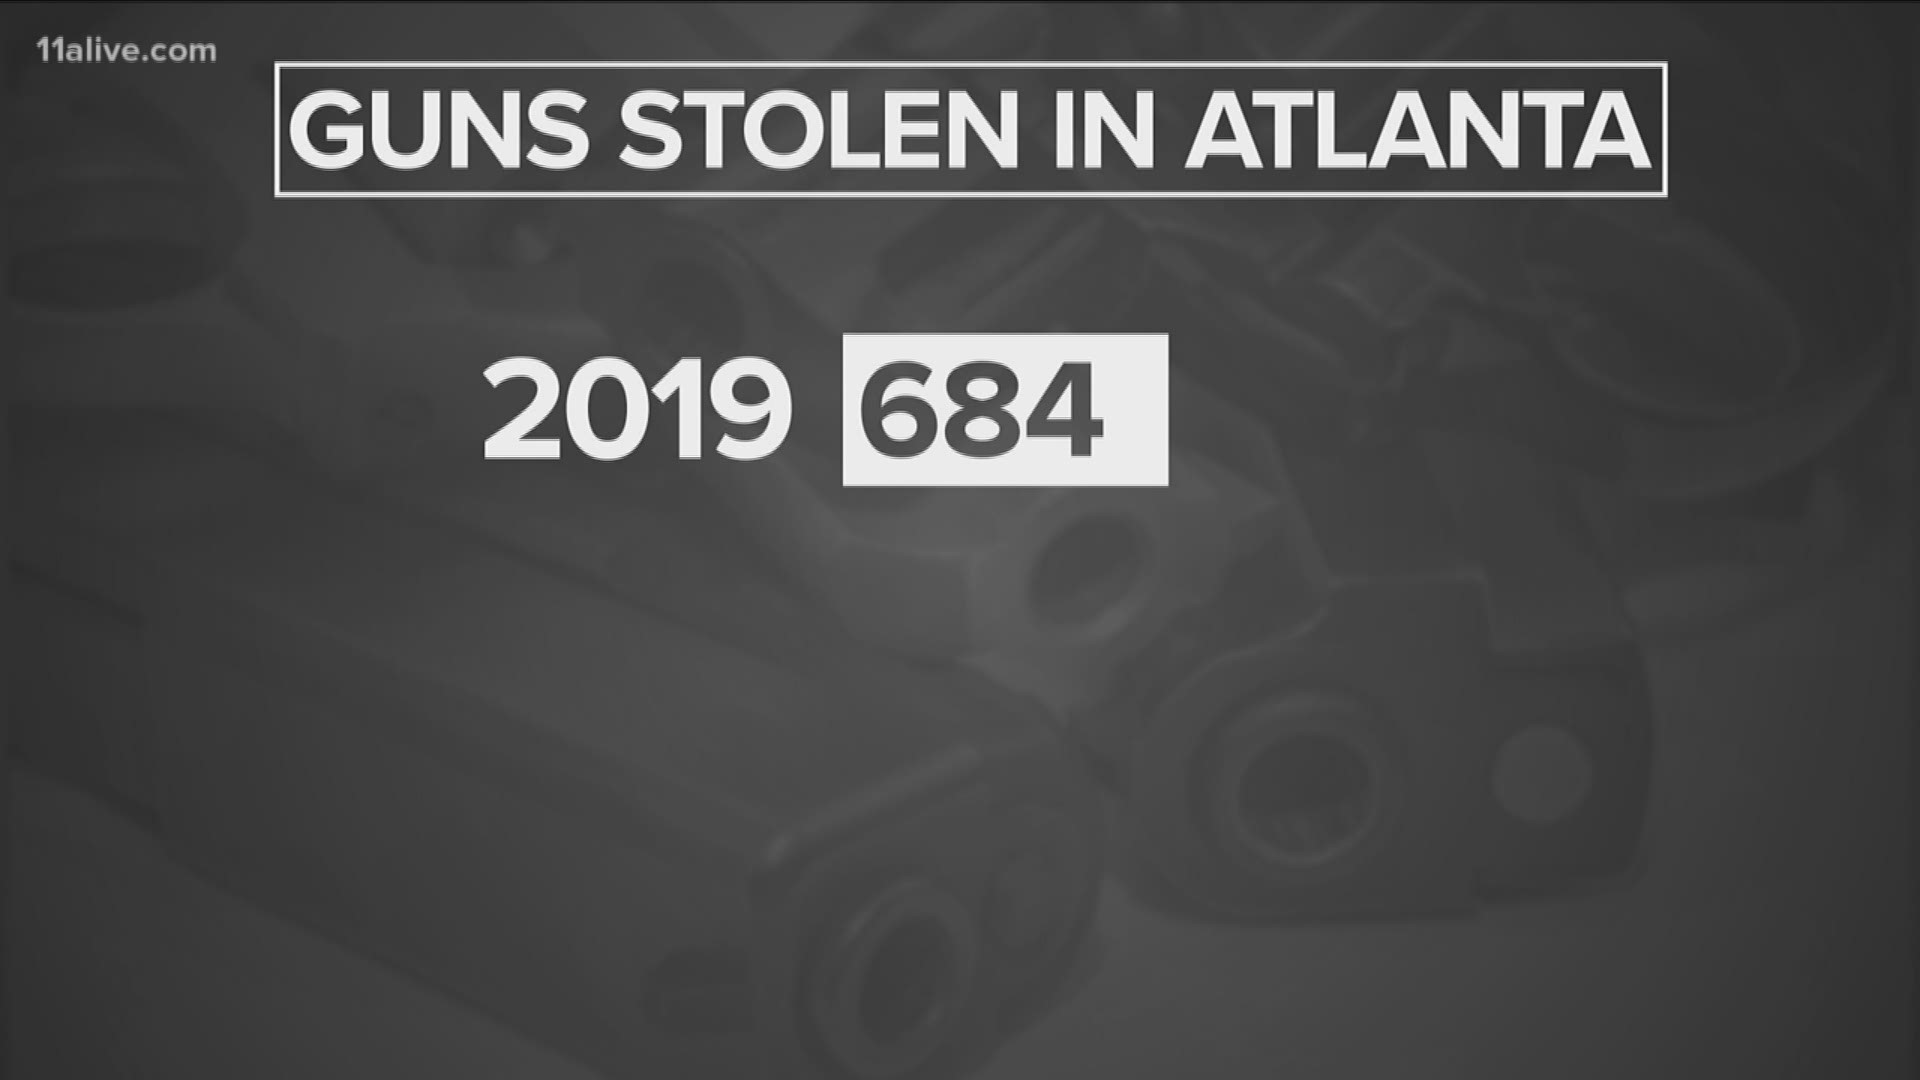 Outlining her thoughts on the current state of public safety in Atlanta on Tuesday, Police Chief Erika Shields pinpointed stolen guns as a rising scourge in the comm